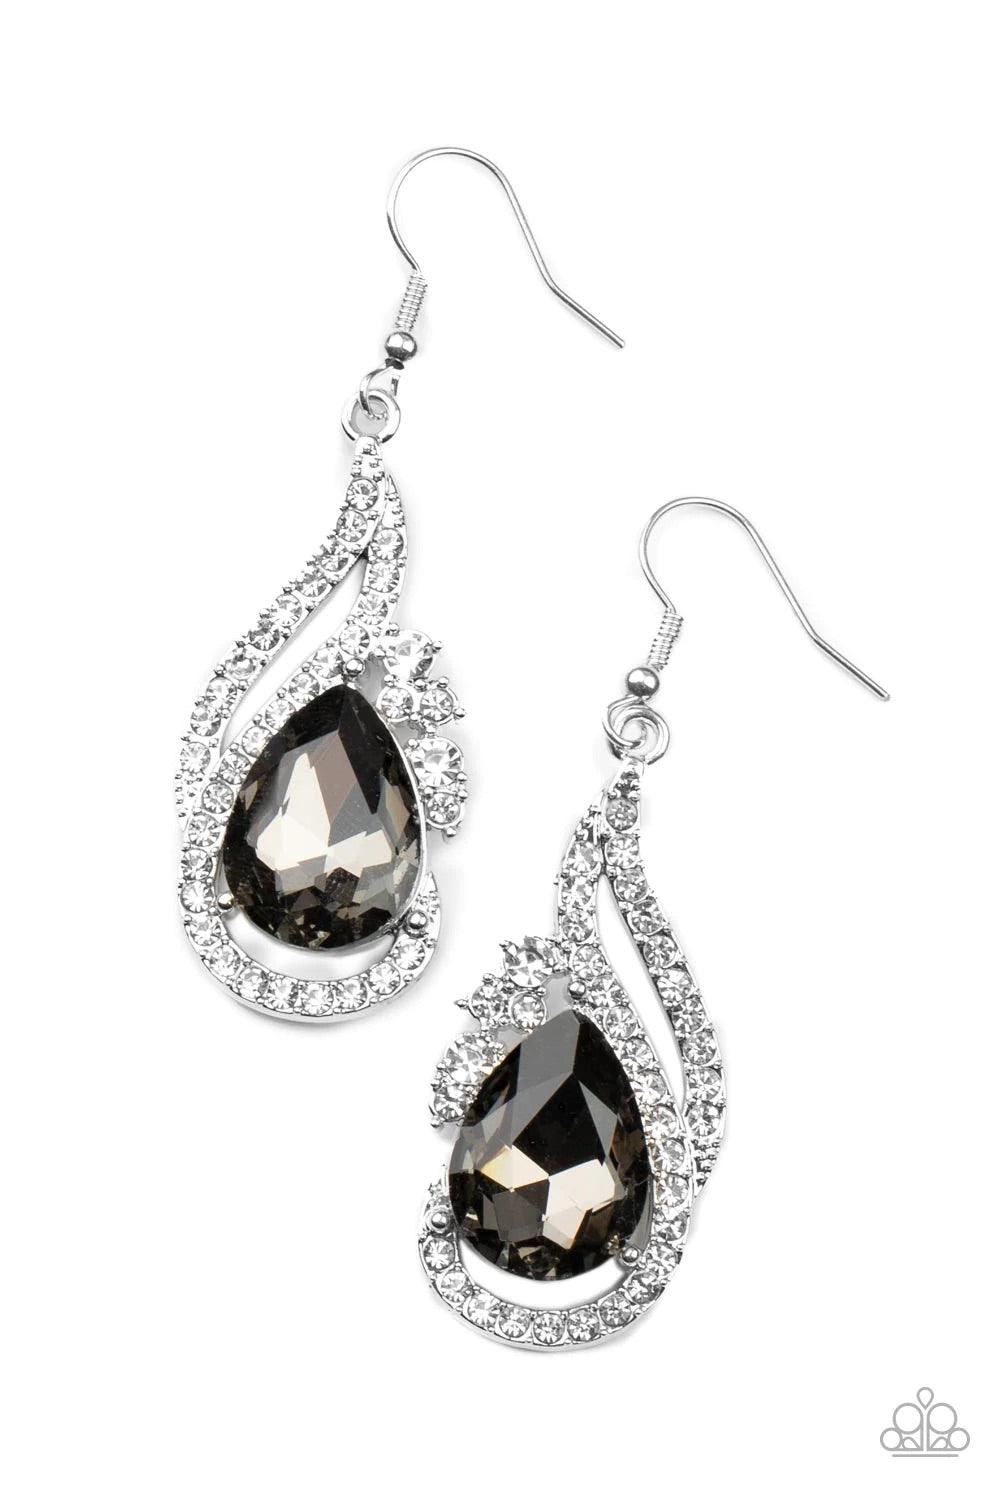 Paparazzi Accessories Dancefloor Diva - Silver White rhinestone encrusted silver bars delicately whirl around an oversized smoky teardrop gem, creating a smoldering lure. Earring attaches to a standard fishhook fitting. Sold as one pair of earrings. Earri